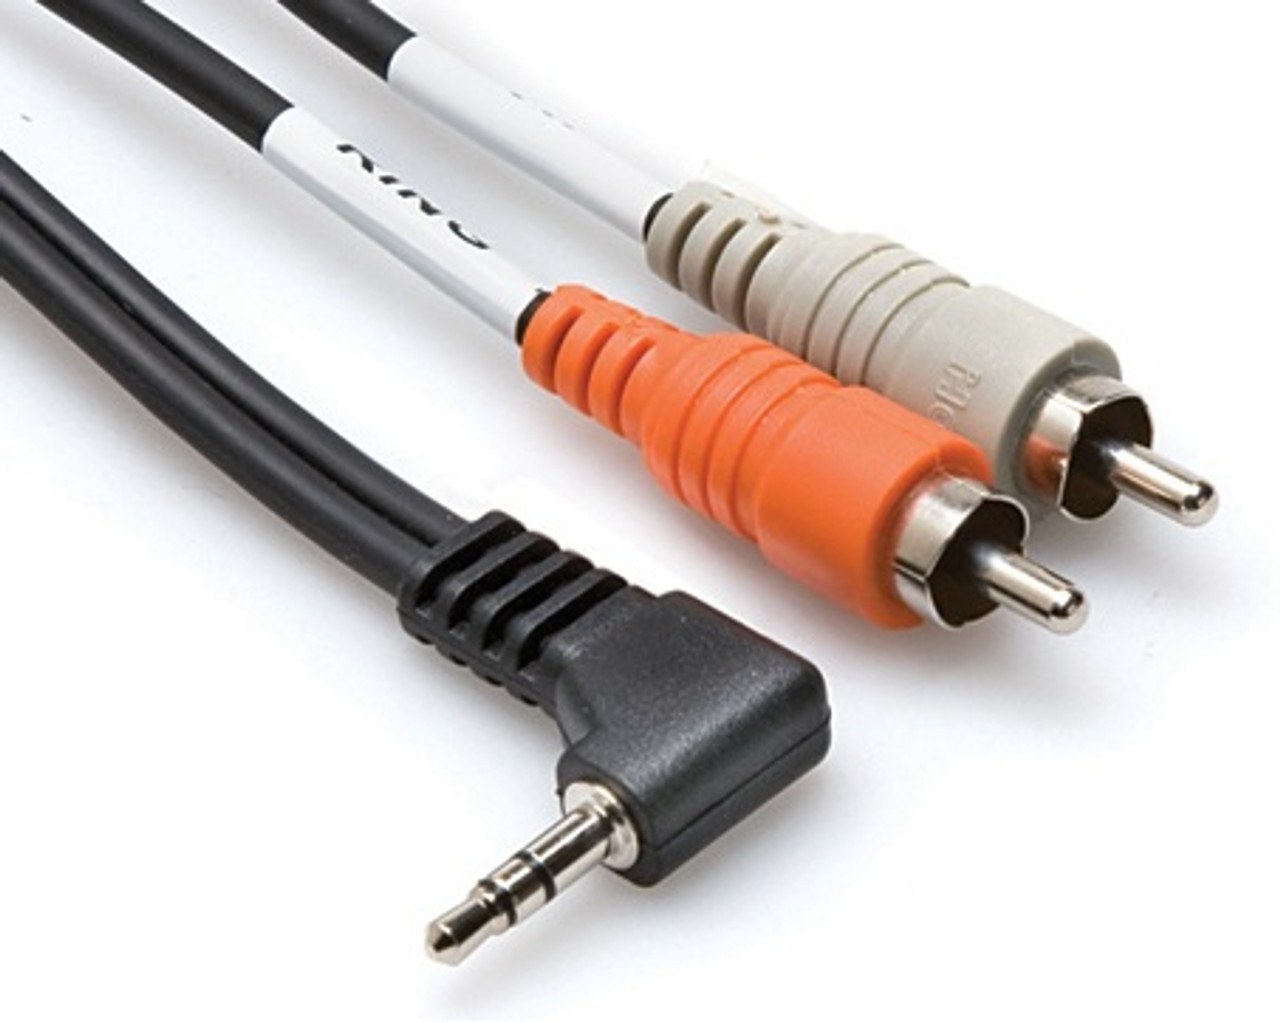 6 ft. Dual RCA to 3.5 mm Adapter